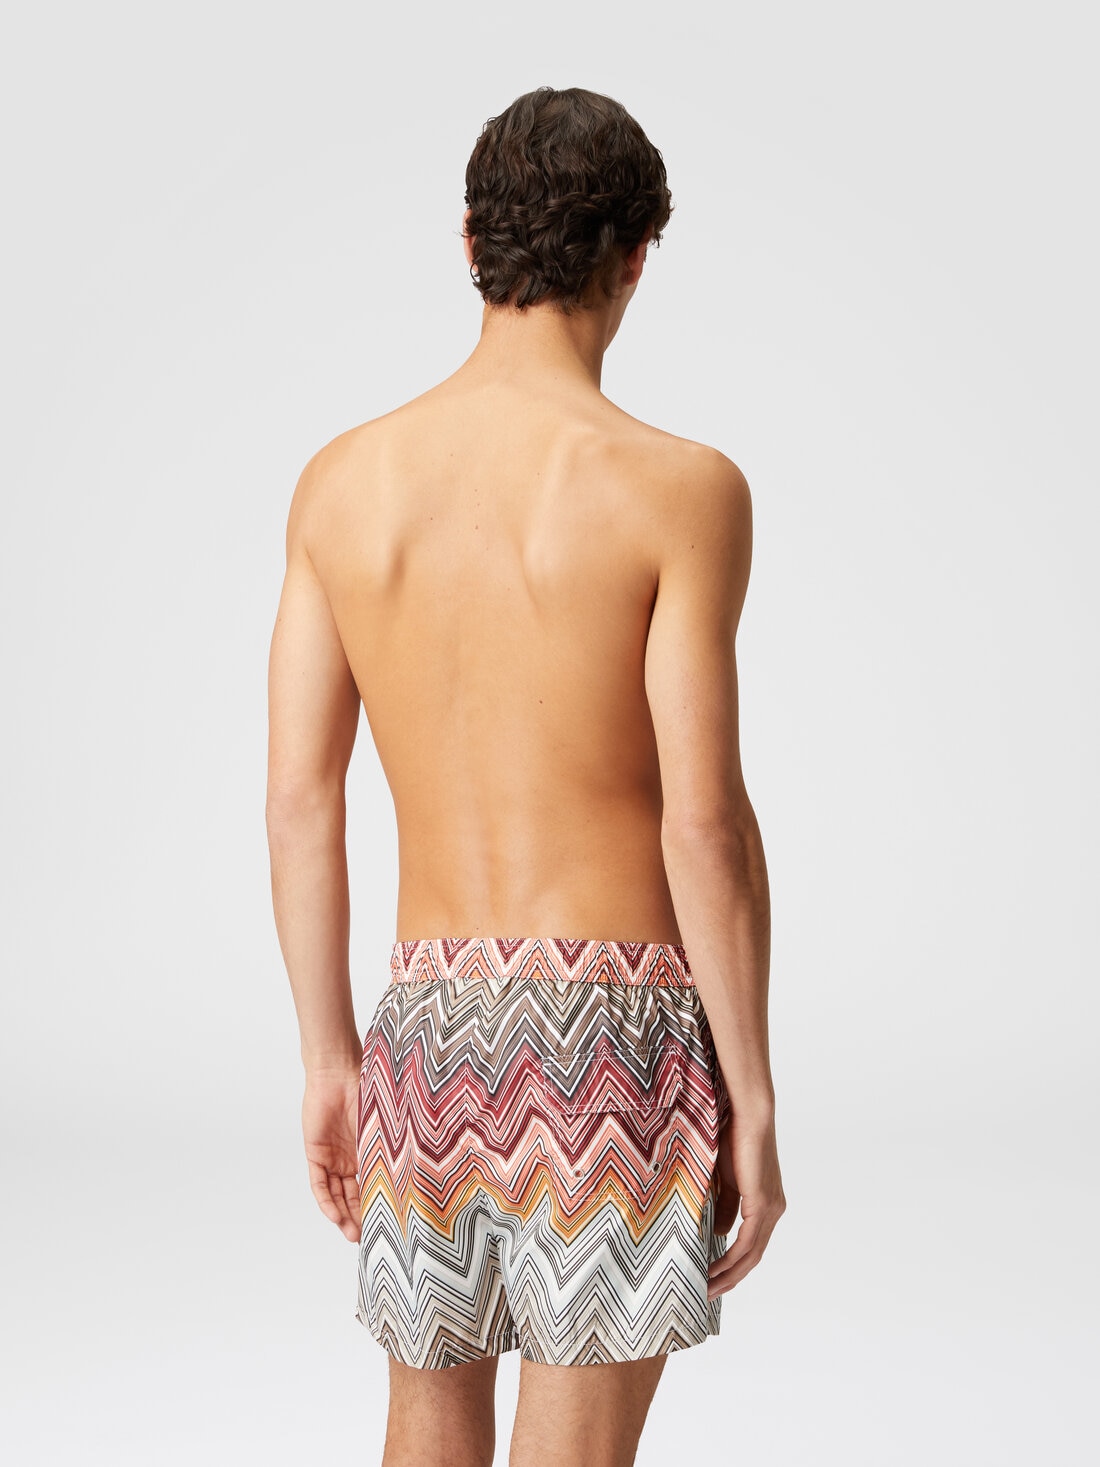 Swimming trunks with large zigzag print, Multicoloured  - US24SP00BW00S3SM992 - 2